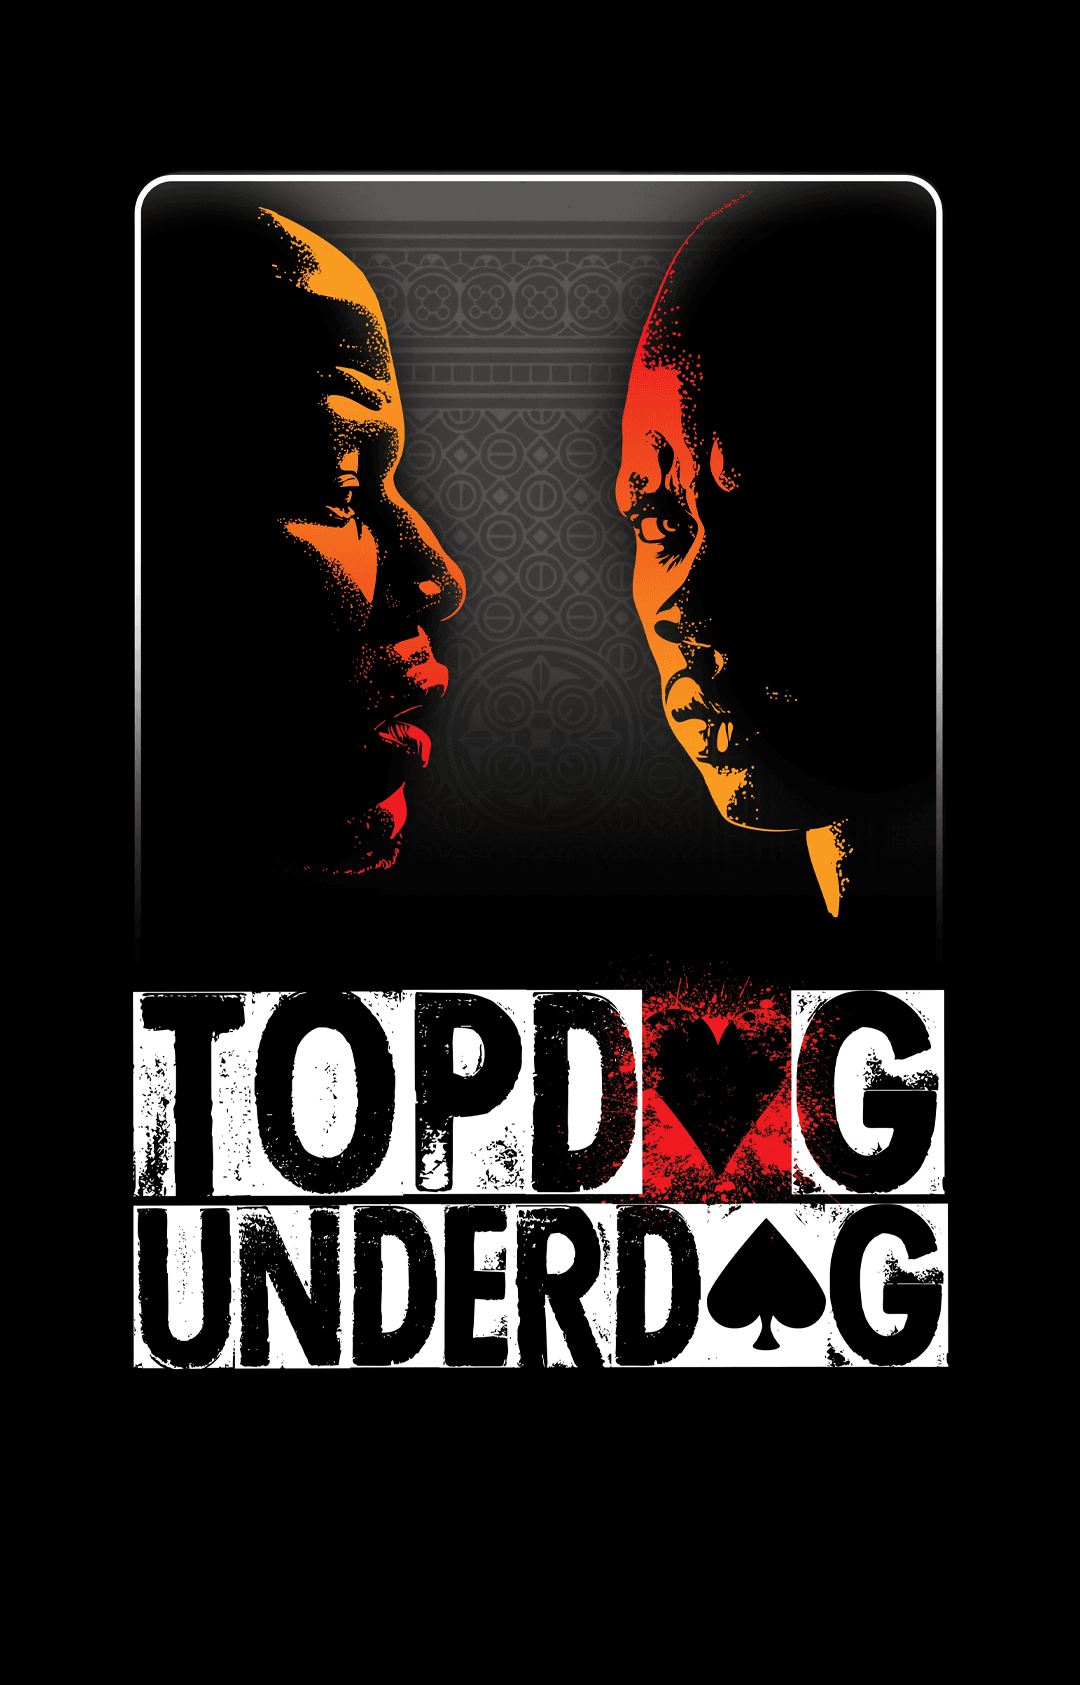 Topdog/Underdog
Wed May 24, 7:30 PM - Sun Jun 11, 10:00 PM
in 201 days